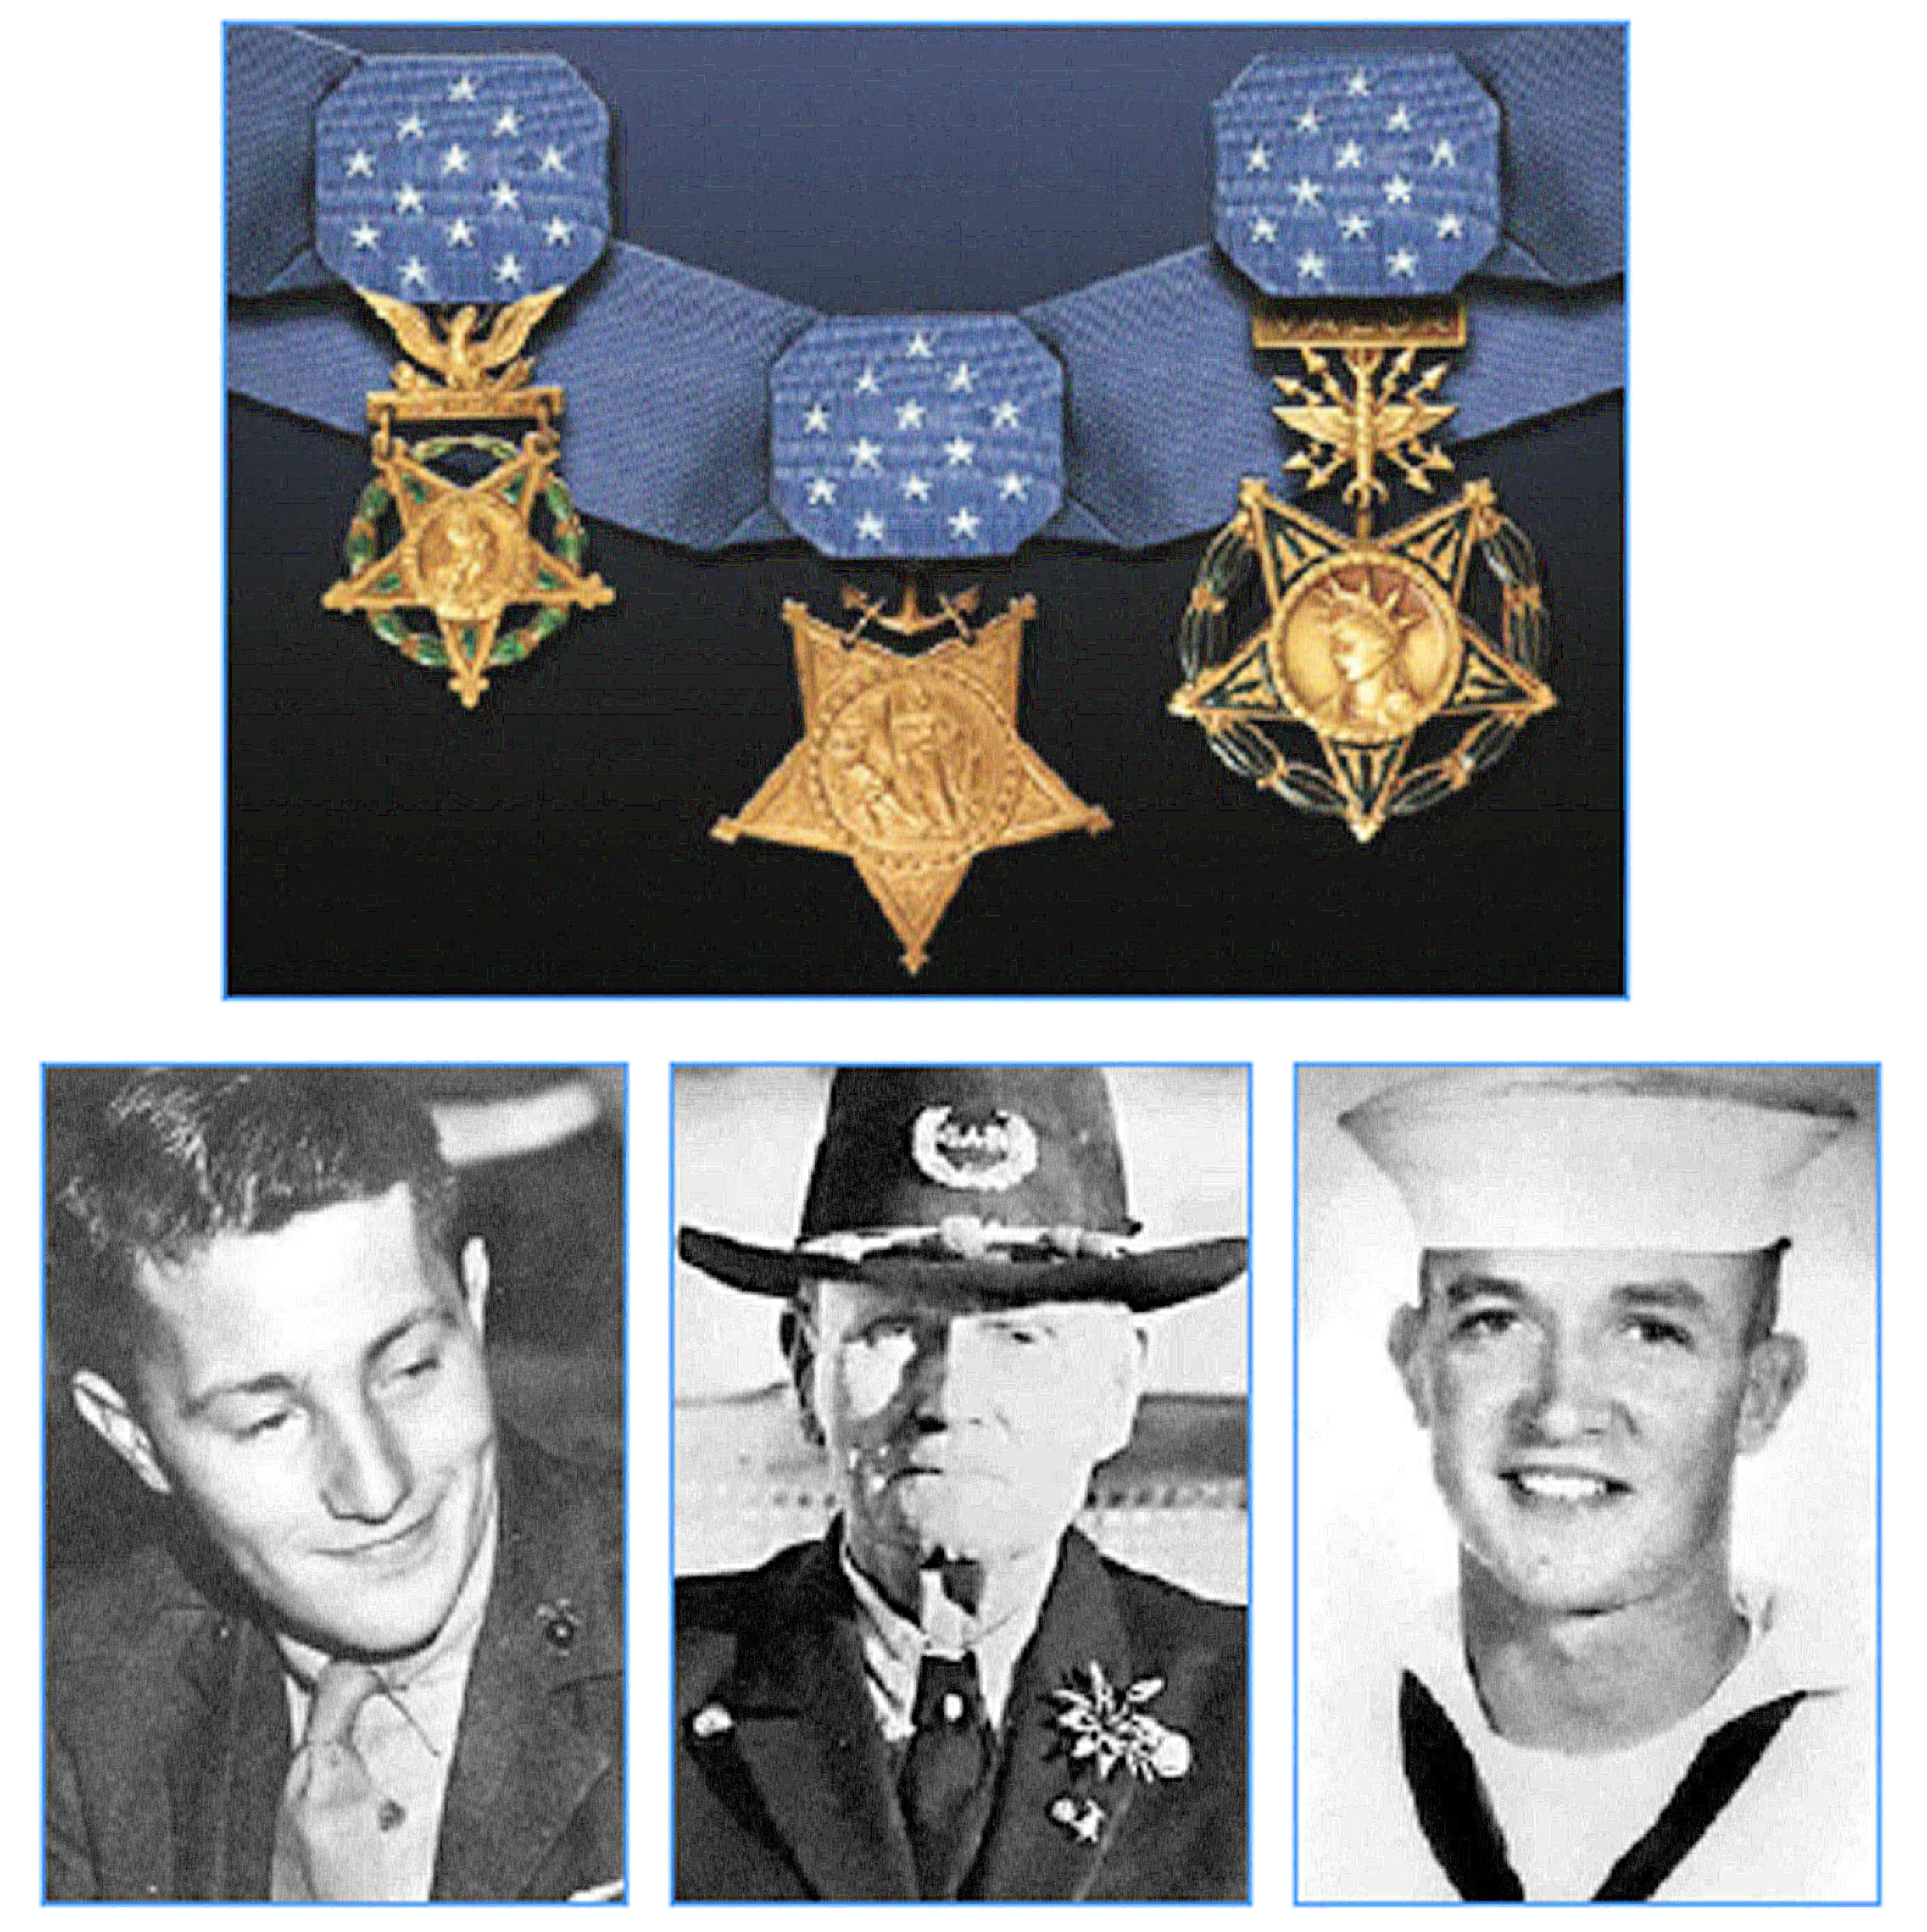 The North Olympic Peninsula Medal of Honor recipients are